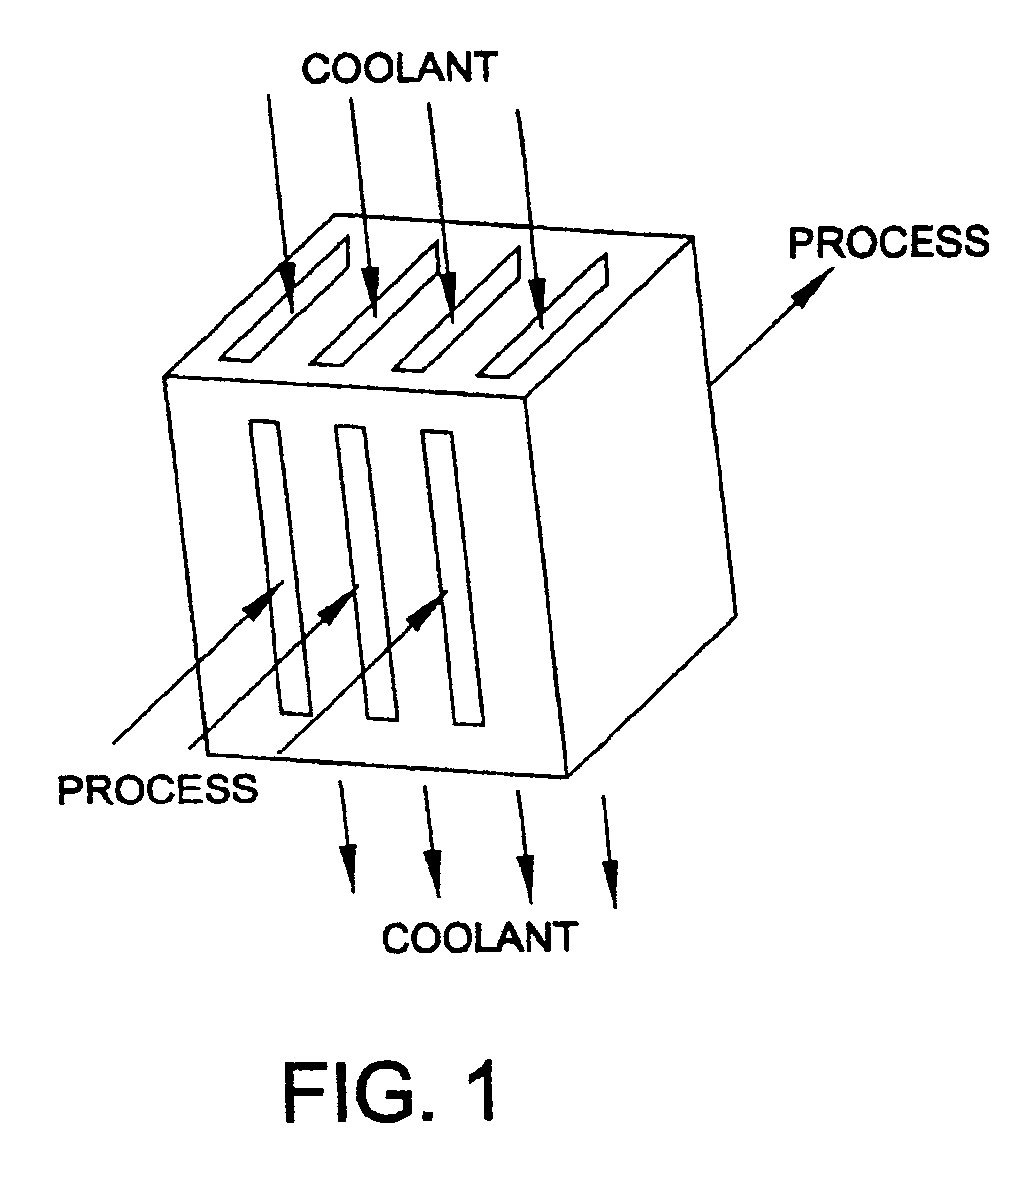 Protected alloy surfaces in microchannel apparatus and catalysts, alumina supported catalysts, catalyst intermediates, and methods of forming catalysts and microchannel apparatus